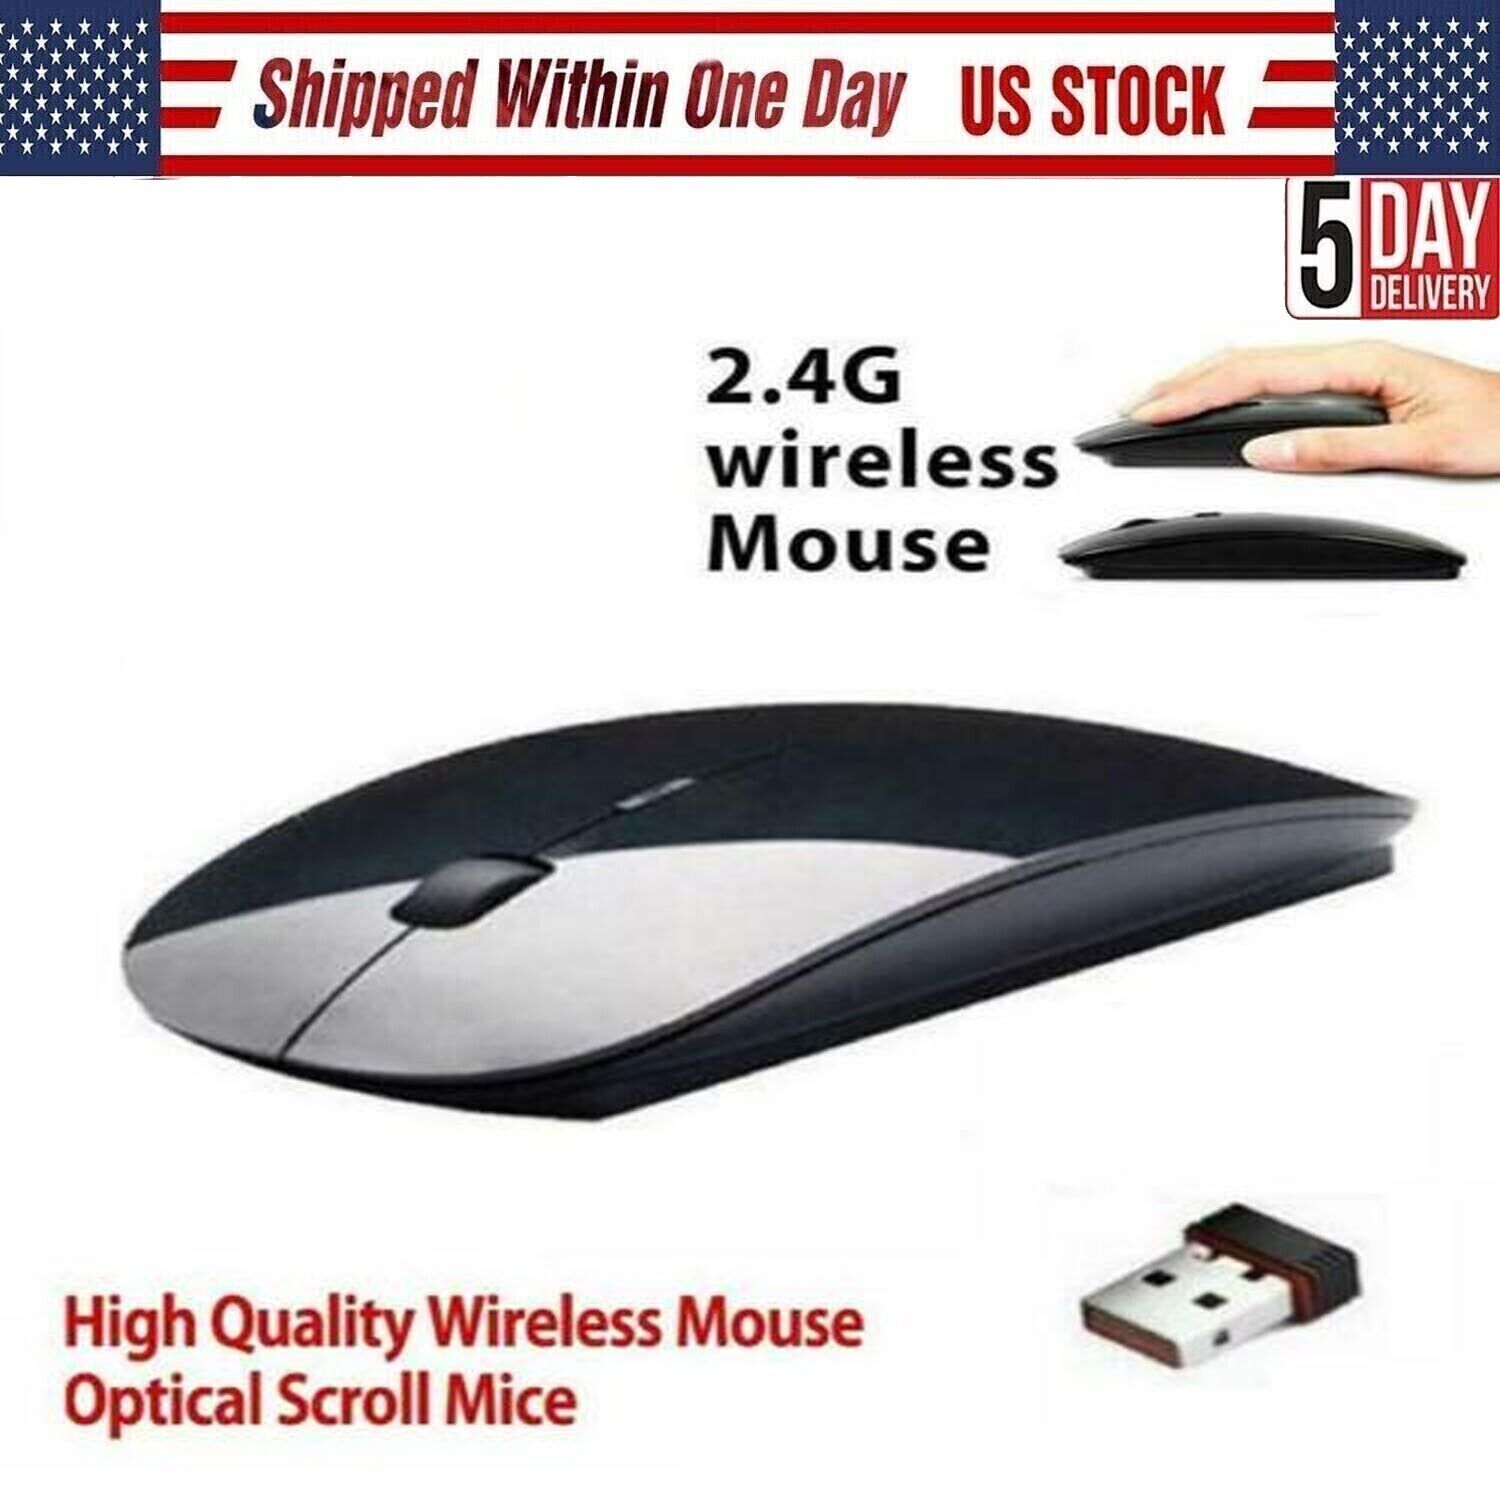 2.4 GHz Wireless Mouse For Samsung Acer Asus Lenovo Dell HP MacBook Laptop US